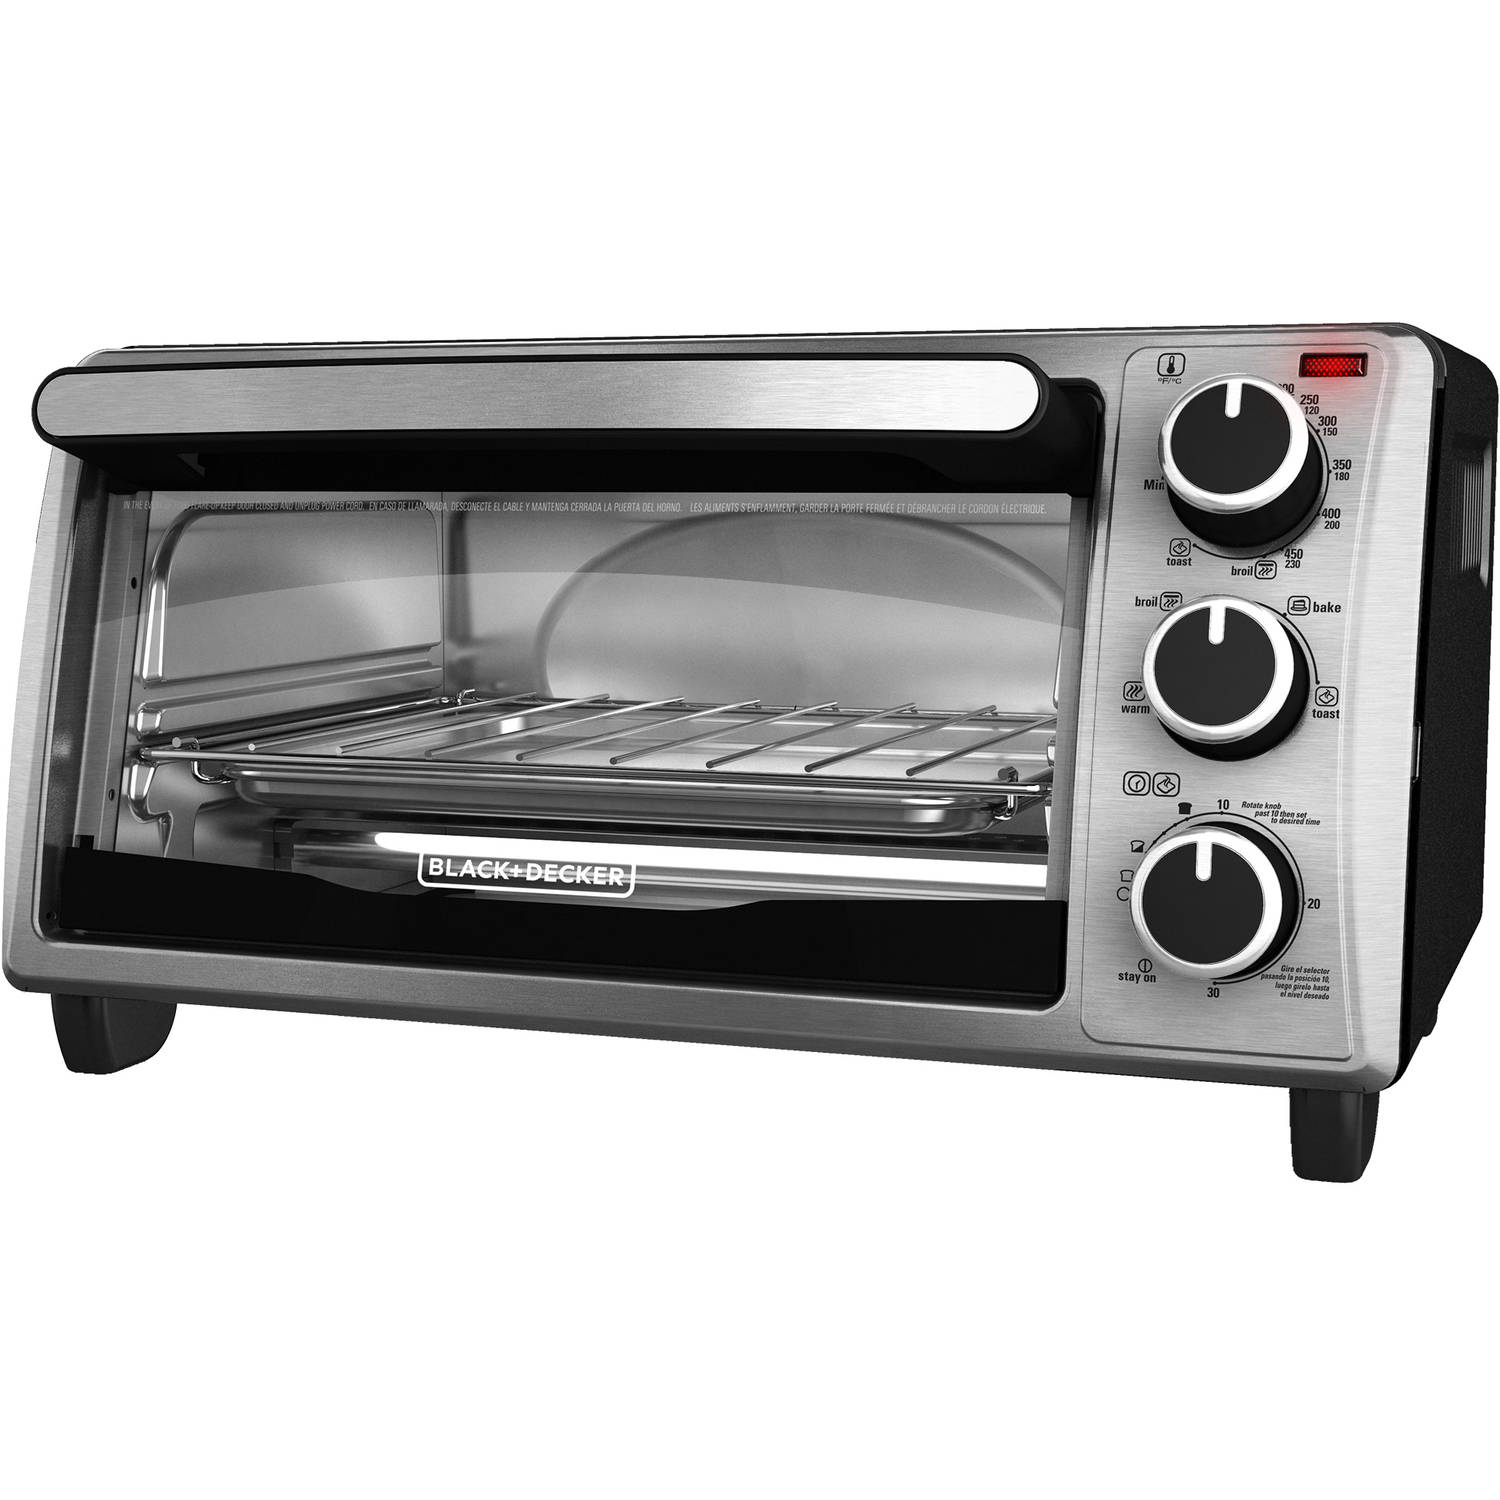 Black & Decker 4 Slice Stainless Steel Toaster Oven - image 1 of 12